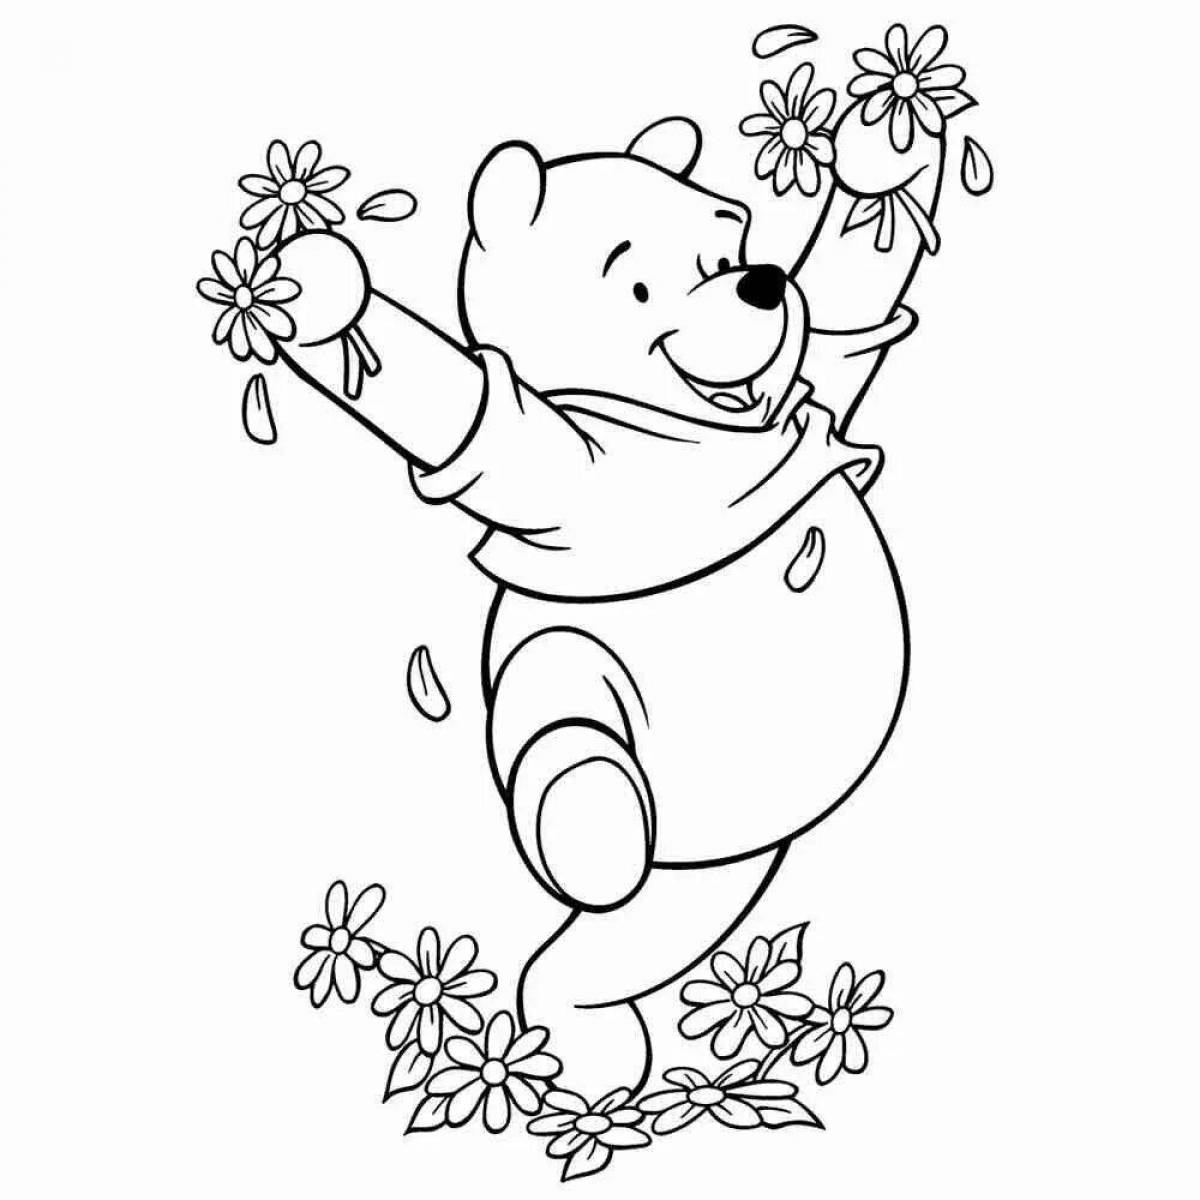 Blissful bear with flowers